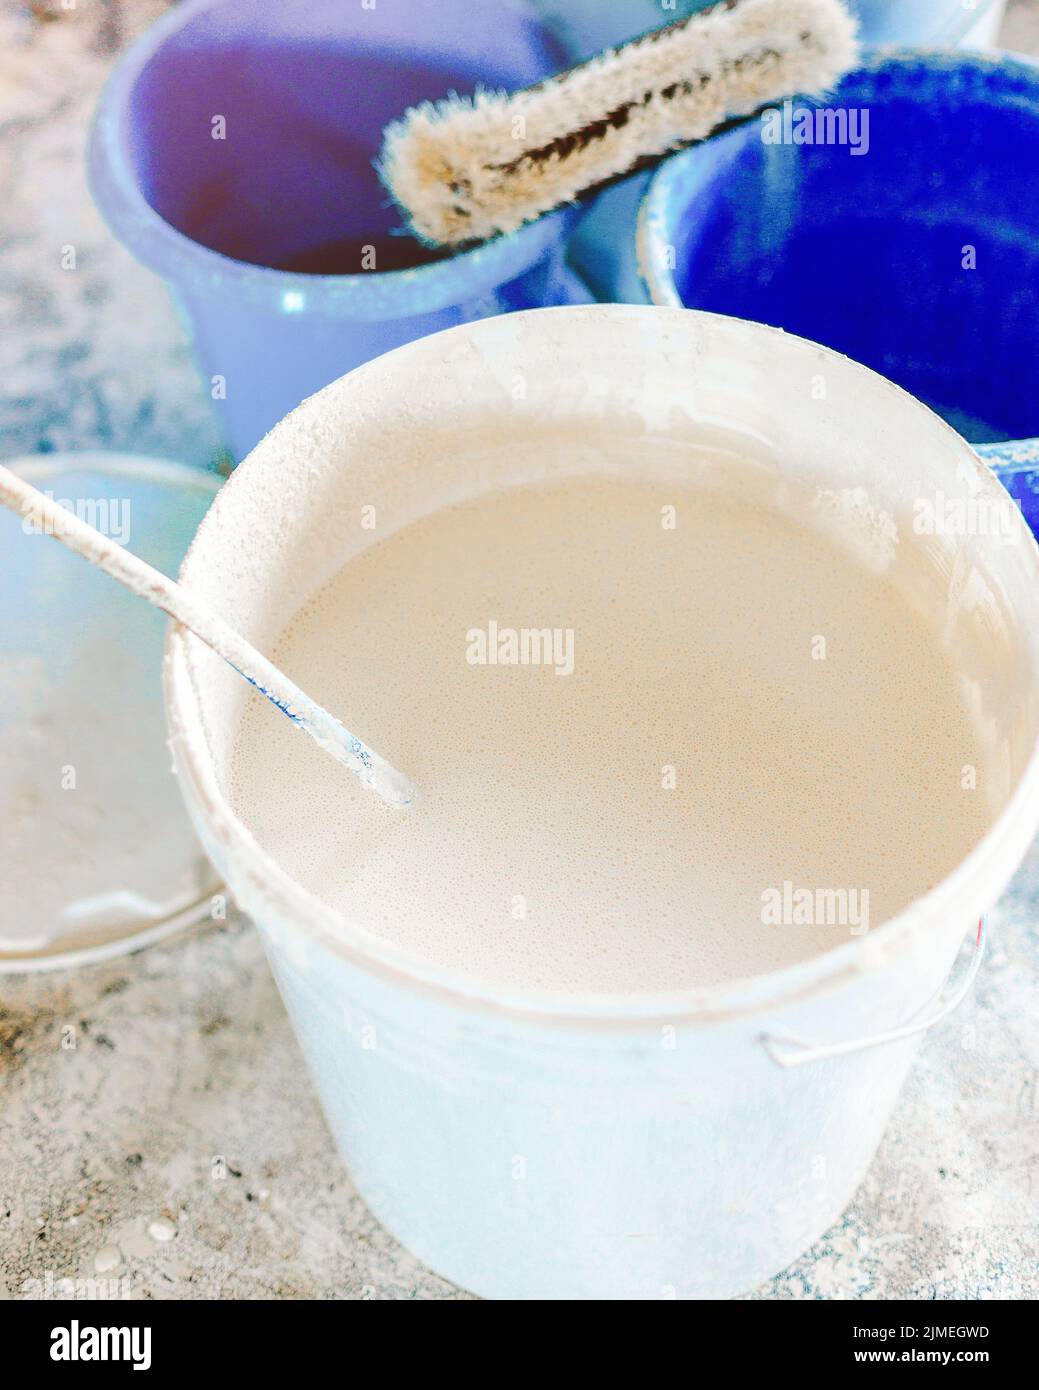 The concept of repair of the house and premises. Buckets of paint and lime for whitewashing and painting walls. Stock Photo